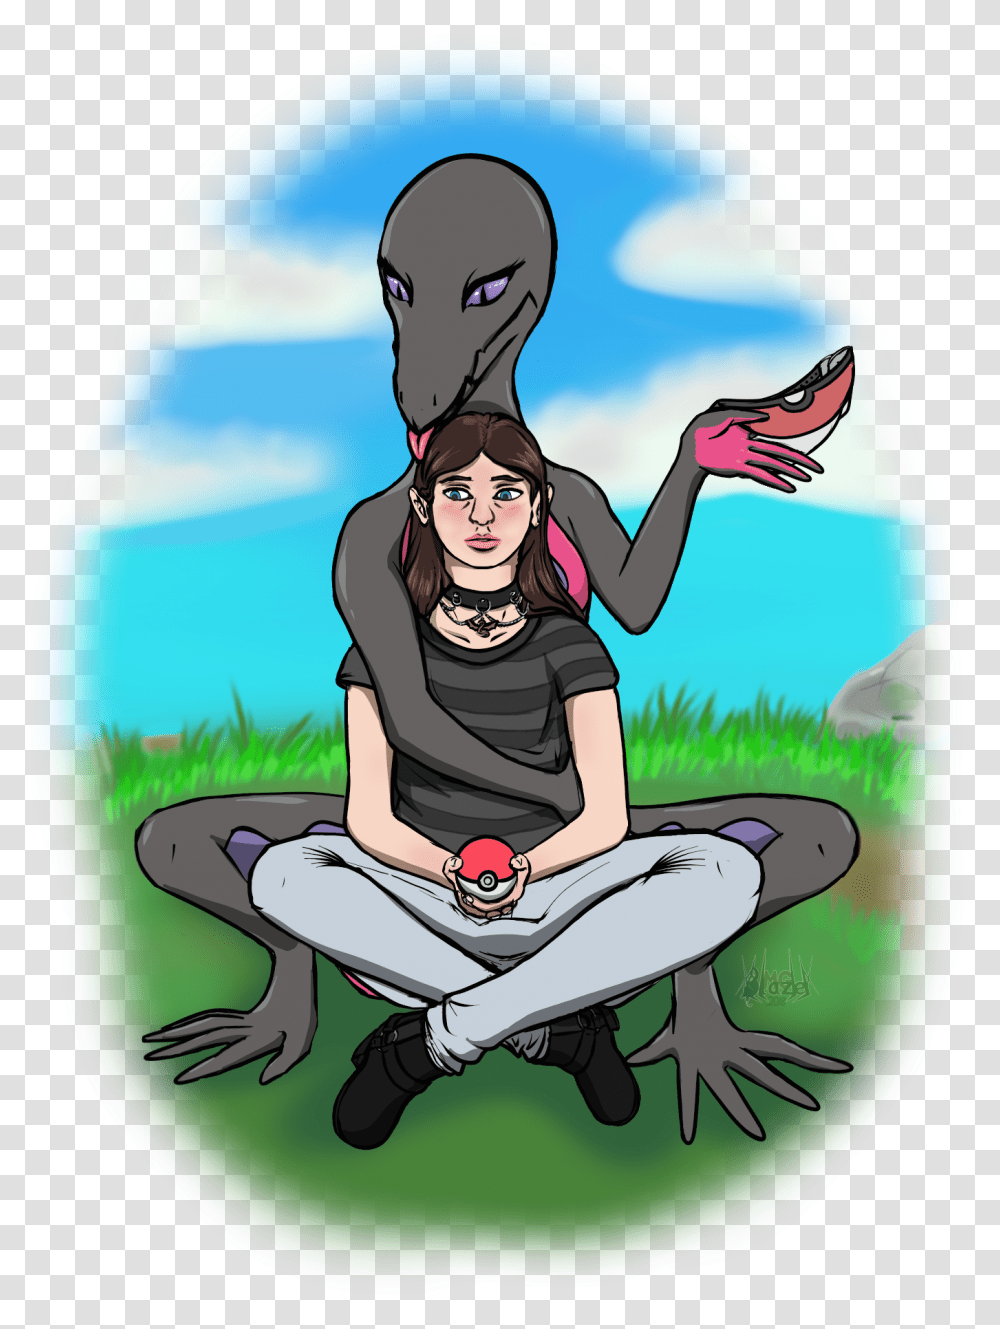 Salazzle And Her Pet Trainer Illustration, Sea, Outdoors, Water, Nature Transparent Png